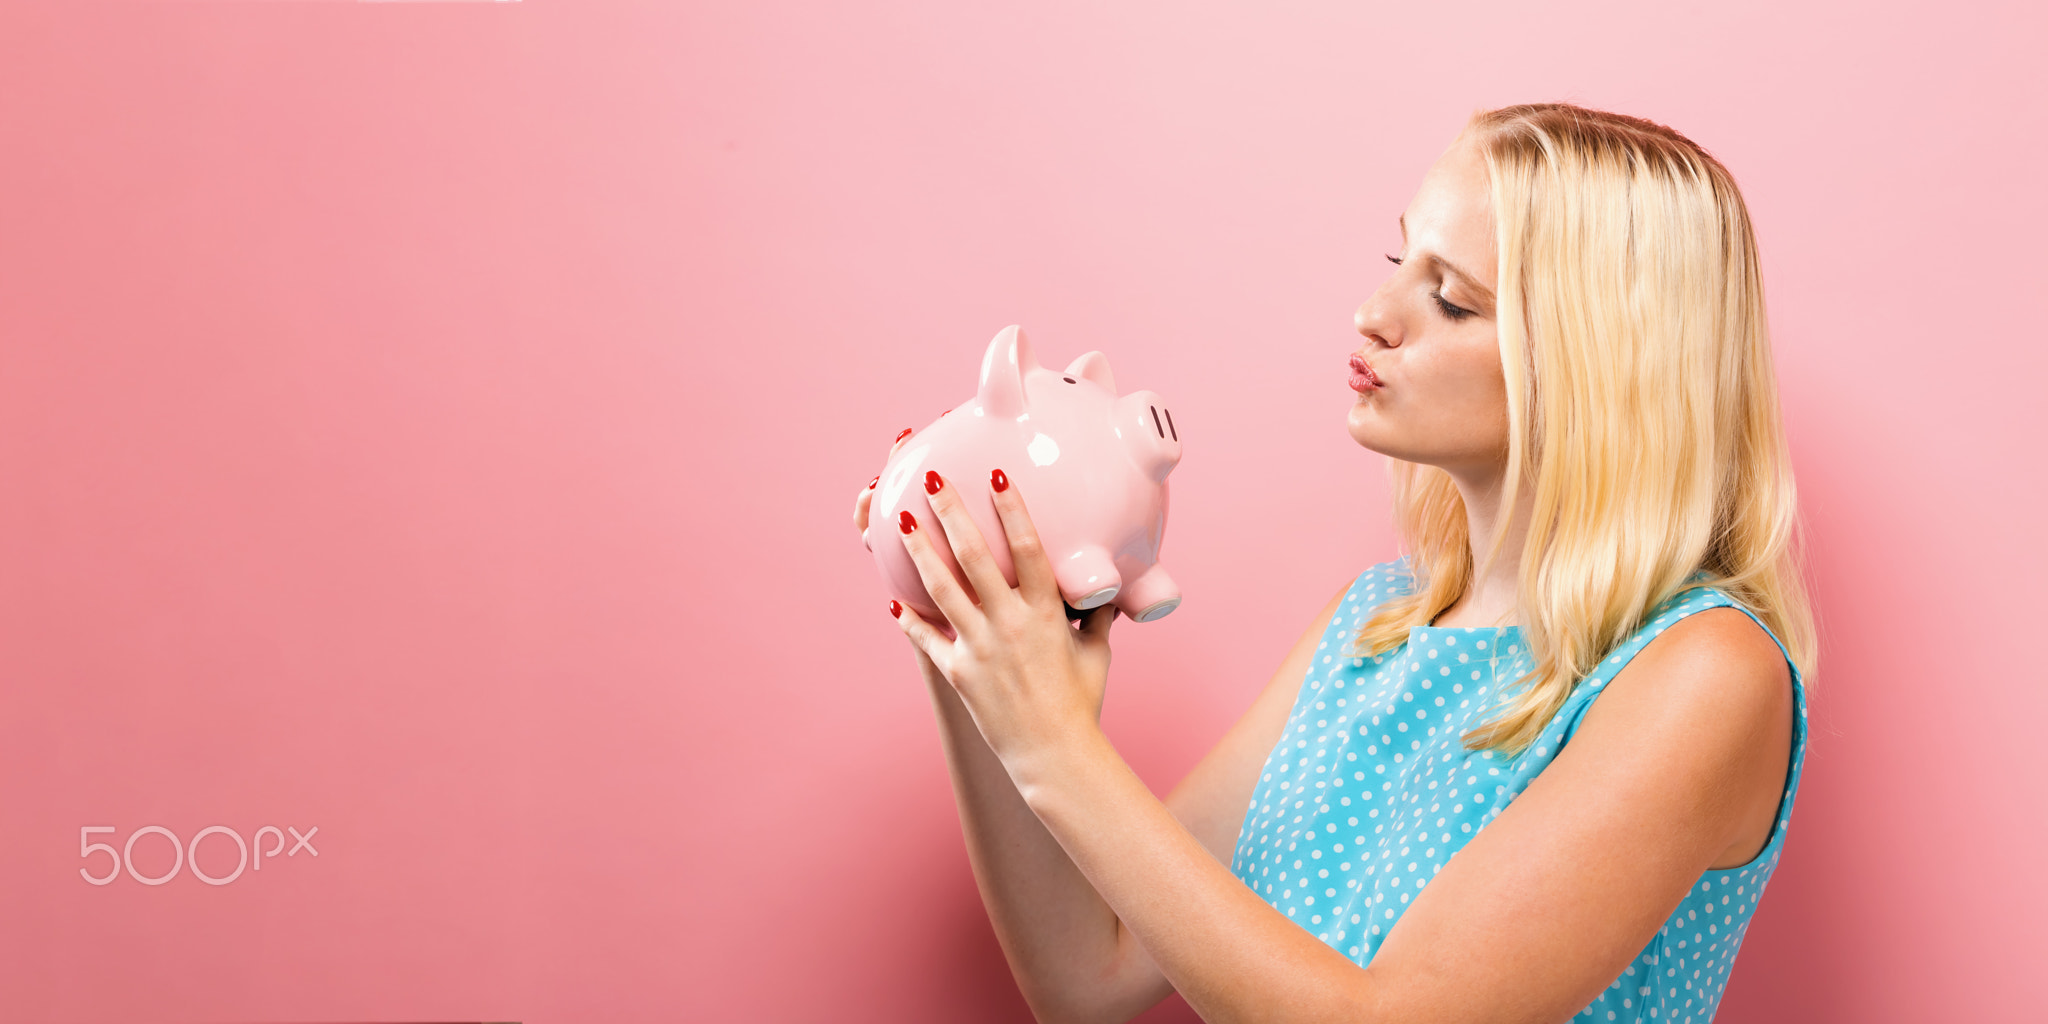 Young woman with a piggy bank